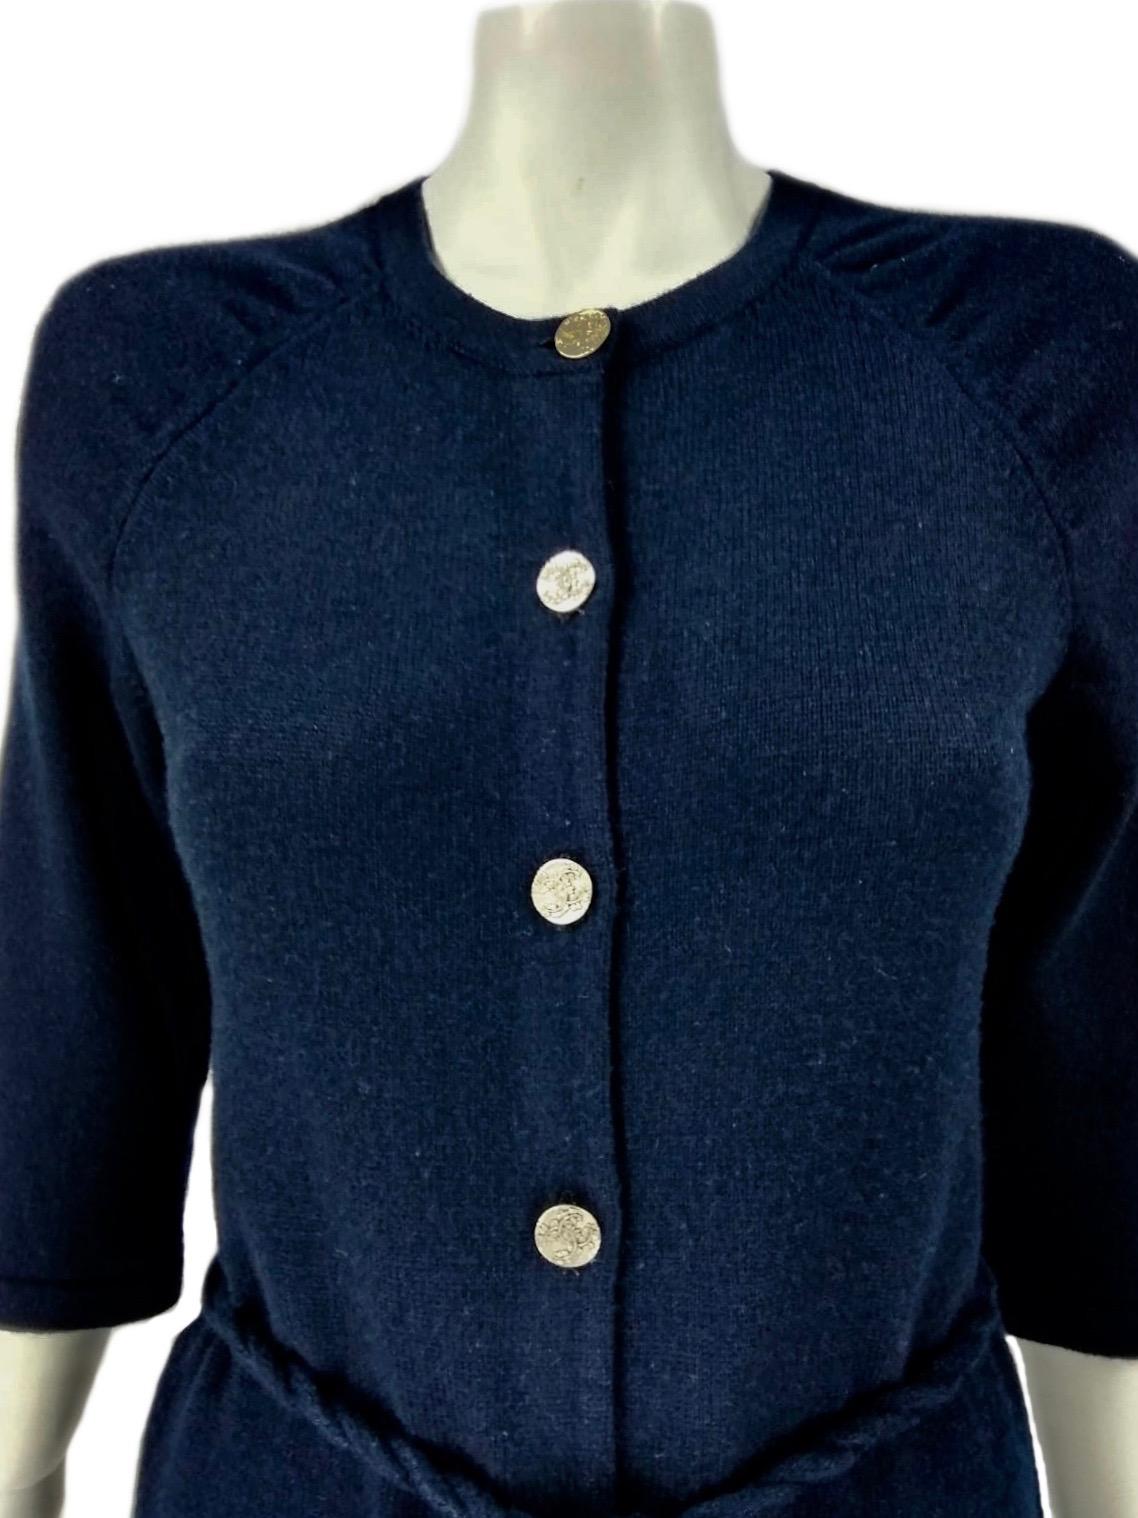 Chanel Cruise 2018 Ancient Greece
Blue navy cashmere dress/cardigan, open on the front, logo buttons and belt, sleeve 3/4 
100% cashmere knitwear
Size FR 36
Made in United Kingdom
Excellent condition as new
